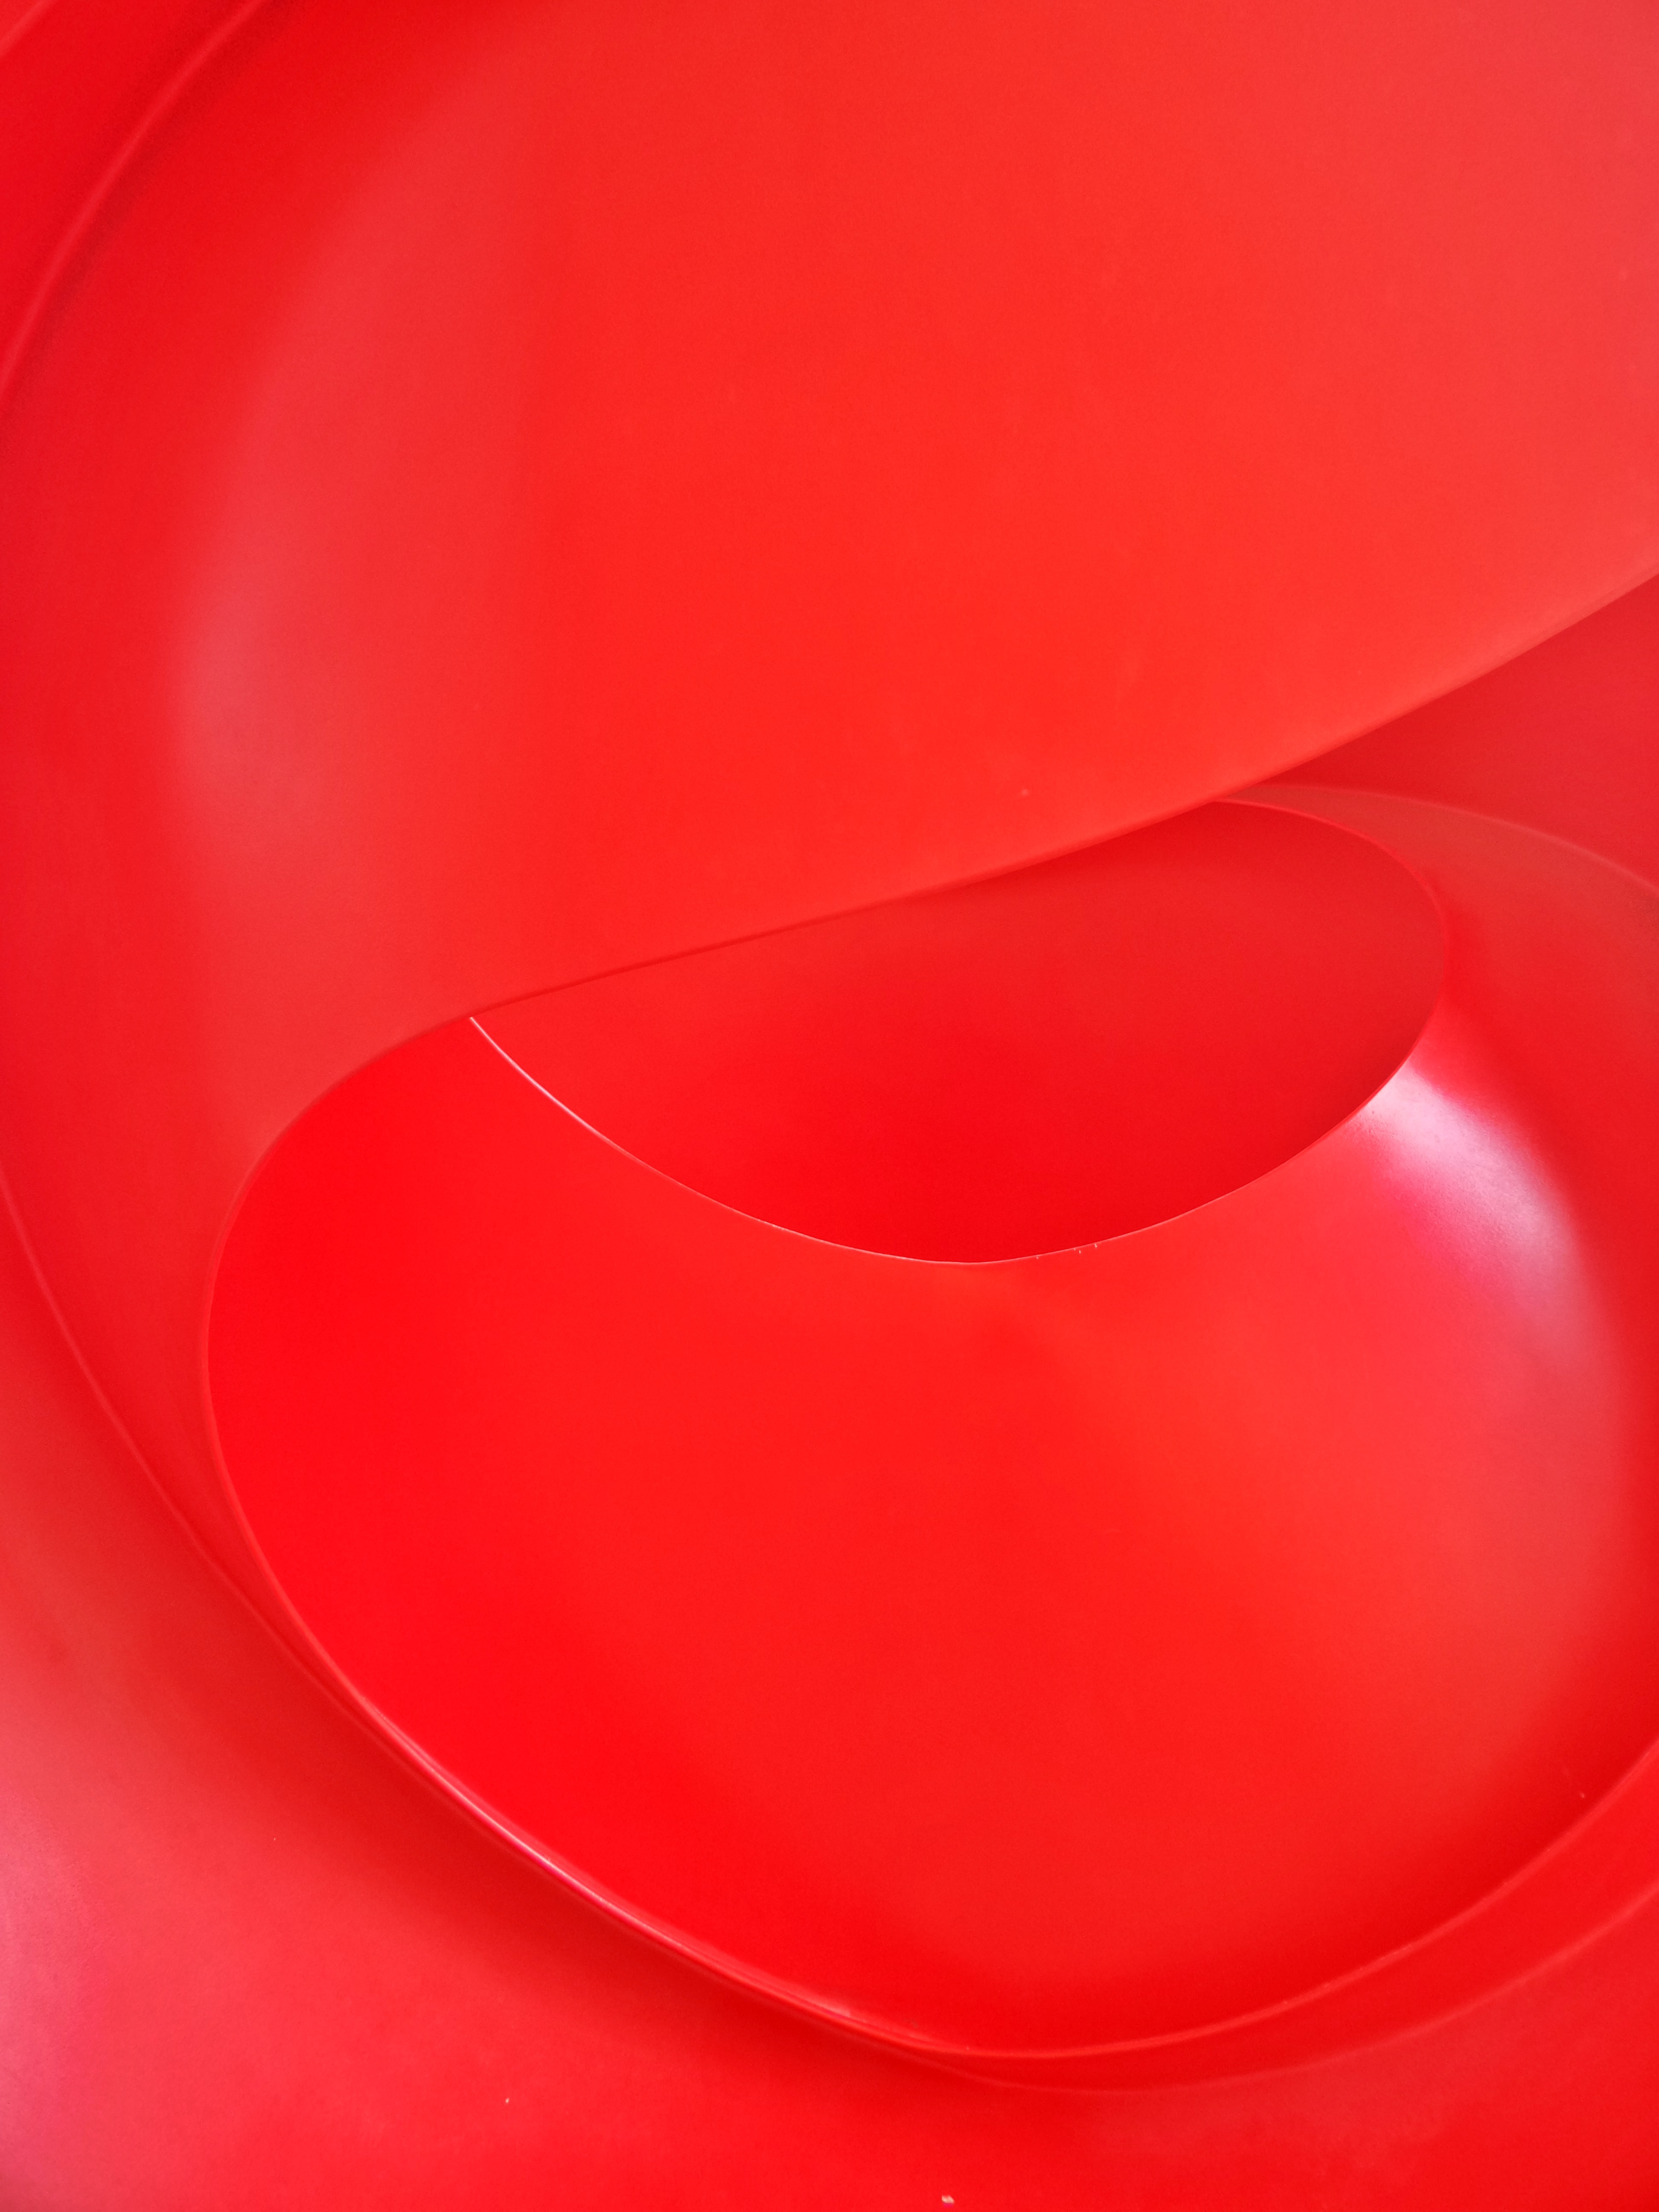 red, macro, texture, lines, textures, surface, plastic